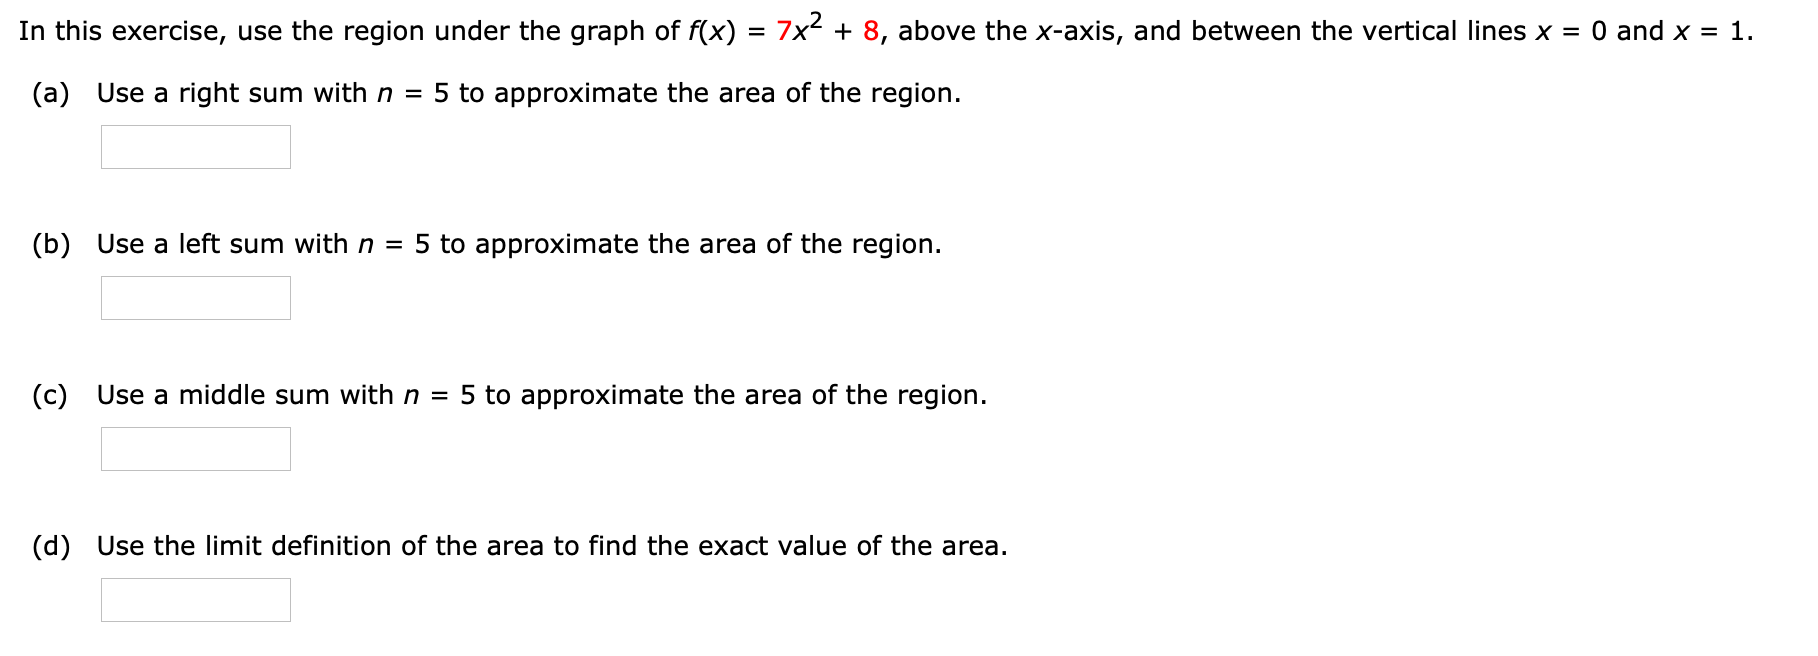 In this exercise, use the region under the graph of f(x) = 7x2 + 8, above the x-axis, and between the vertical lines x = 0 and x = 1.
(a) Use a right sum with n =
5 to approximate the area of the region.
(b) Use a left sum with n = 5 to approximate the area of the region.
(c) Use a middle sum with n = 5 to approximate the area of the region.
(d) Use the limit definition of the area to find the exact value of the area.
